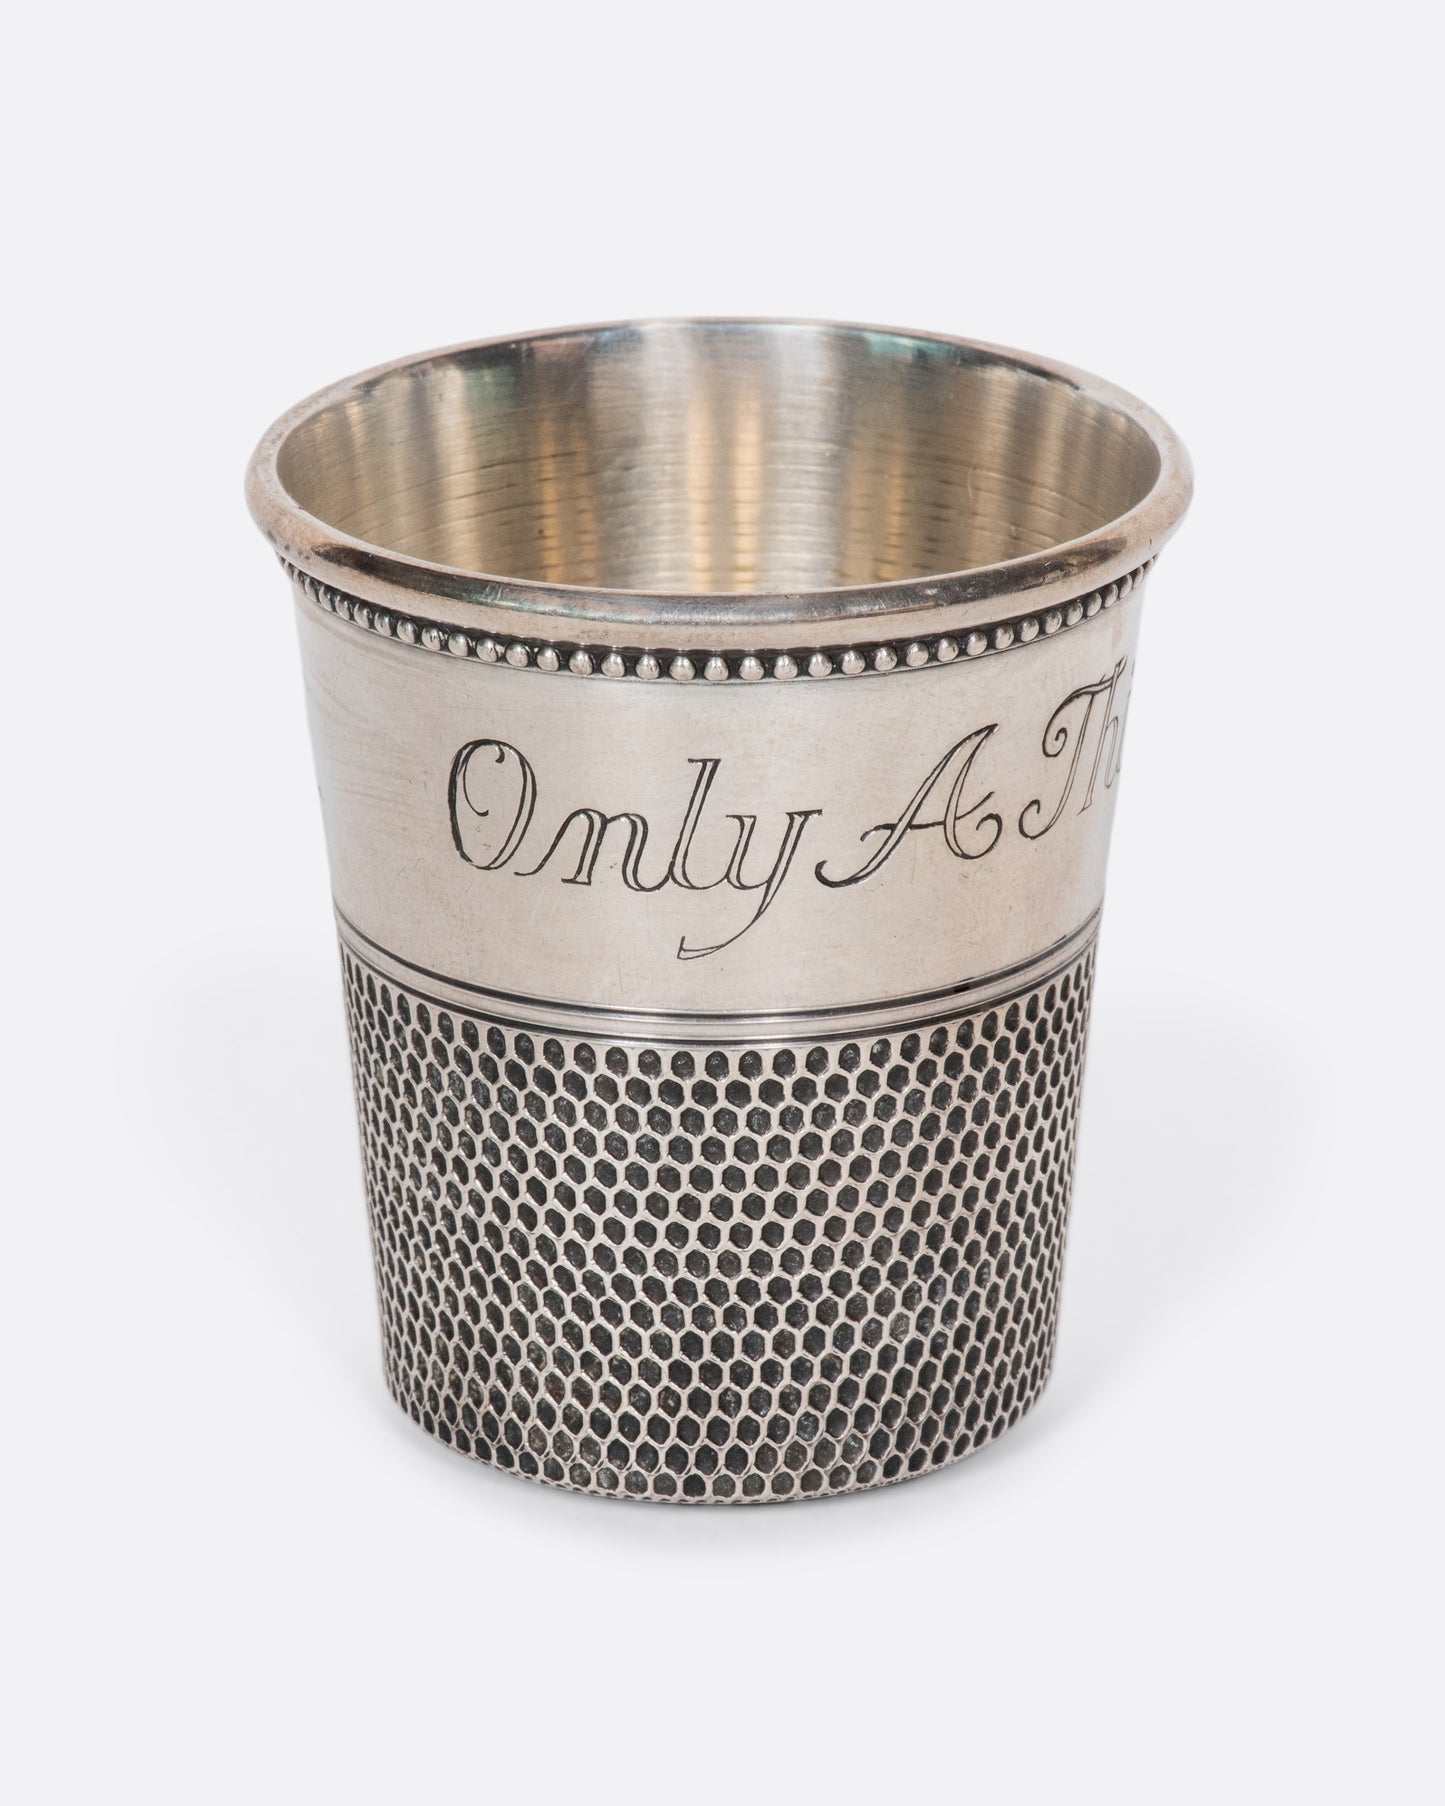 This rare sterling silver vintage shot glass is engraved with "Only a thimble full". A cheeky, yet elegant addition to any bar.